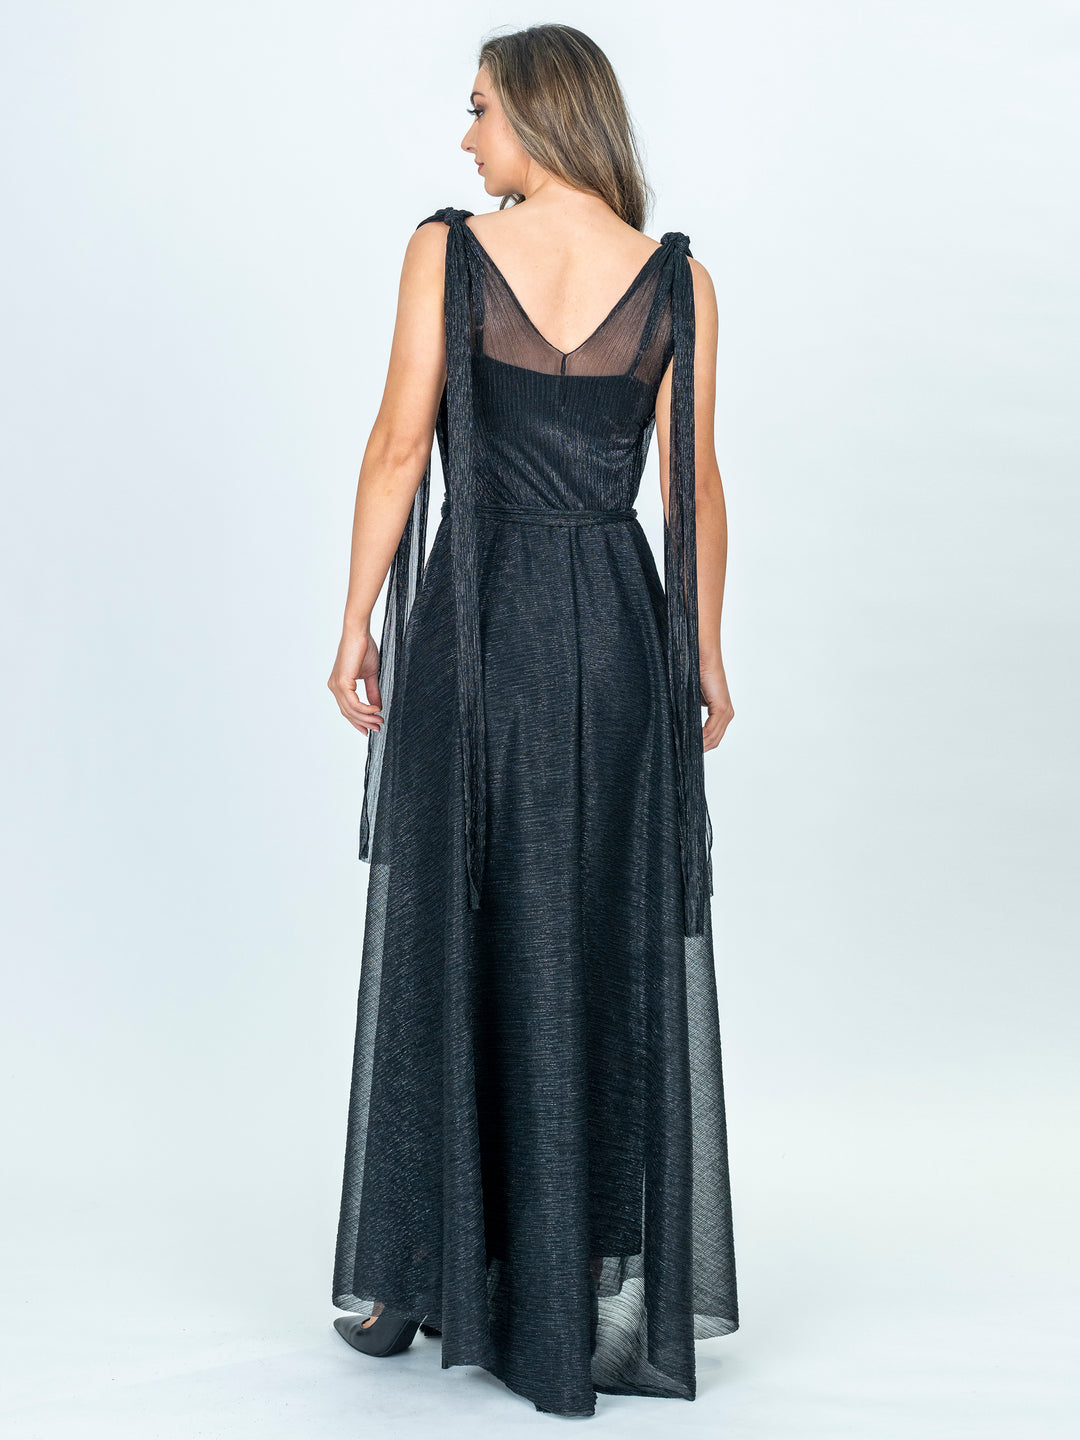 HARLOW Tie-Up A-Line Maxi Dress